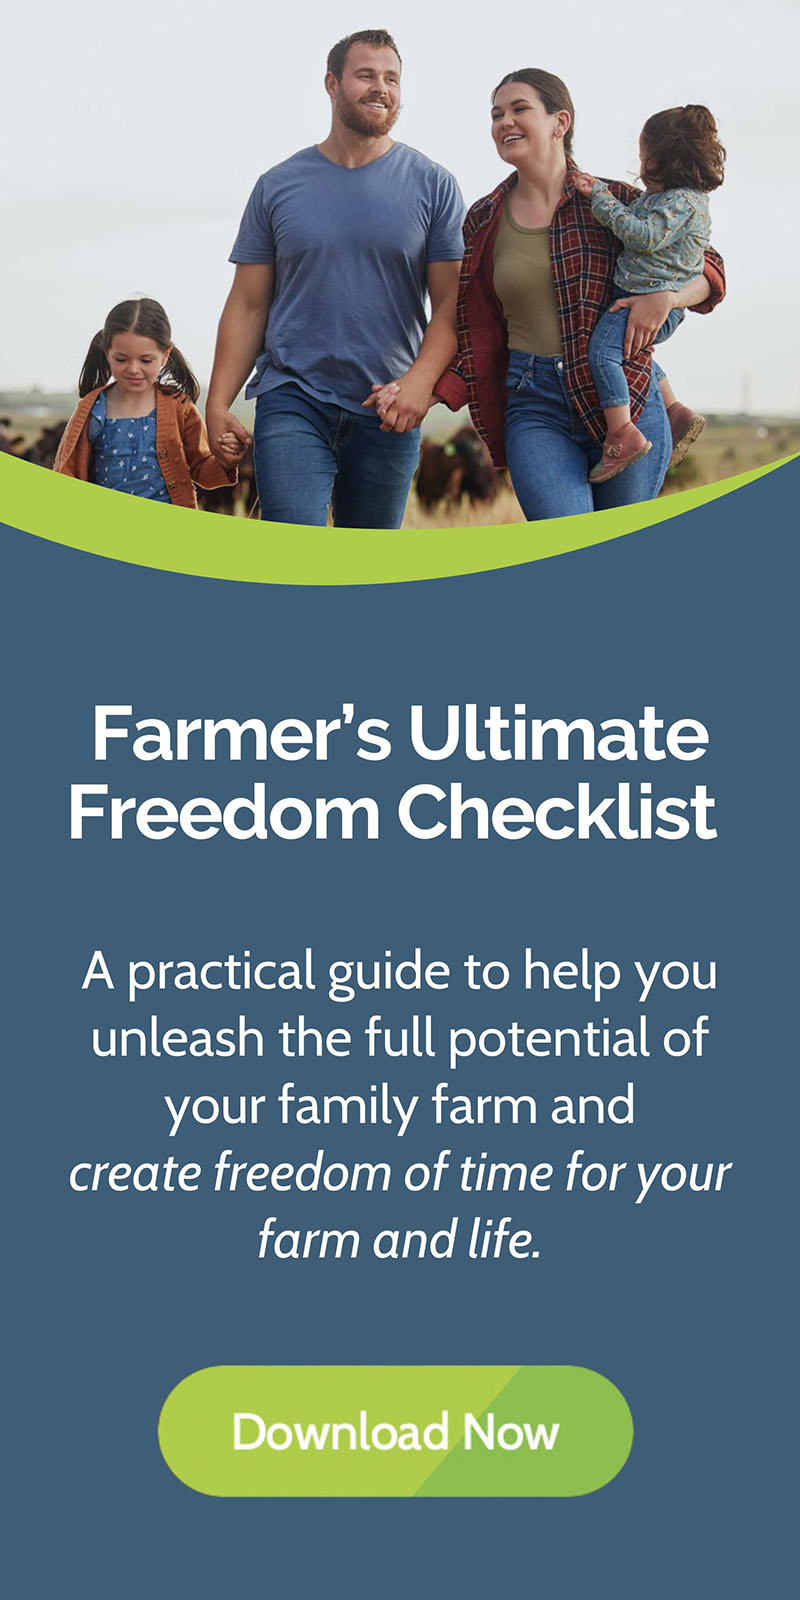 Business Tips for Farmers in Australia - Free Download